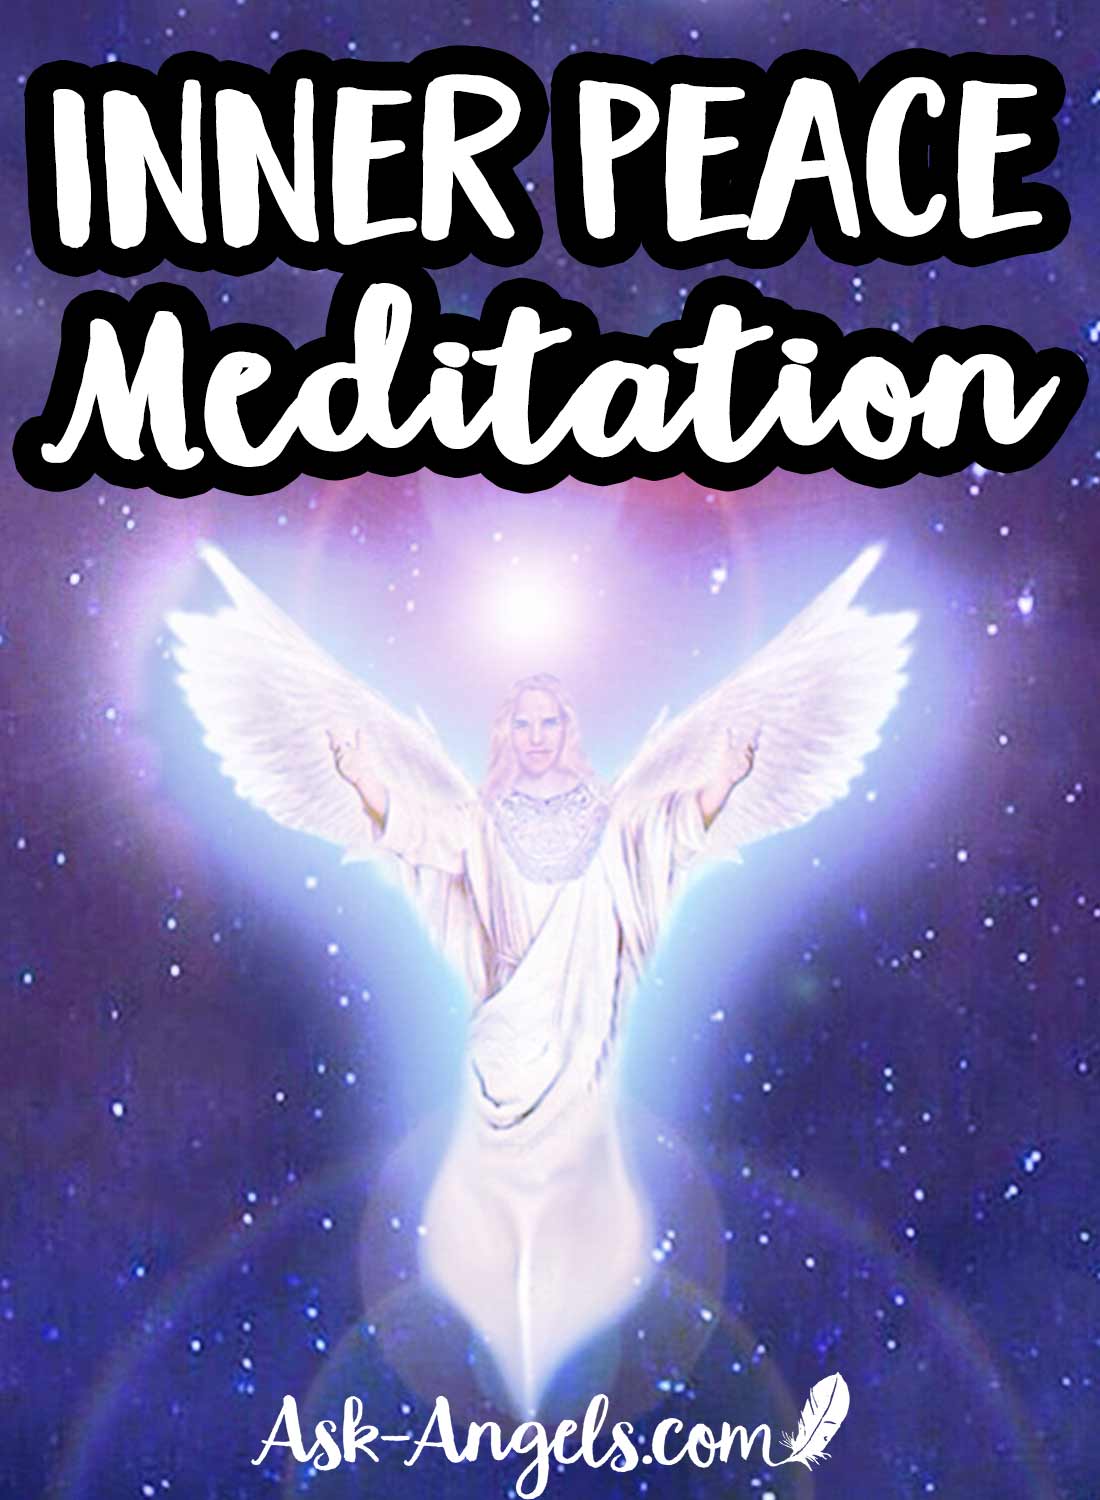 Peace Meditation to Help You Through The Current Global Crisis